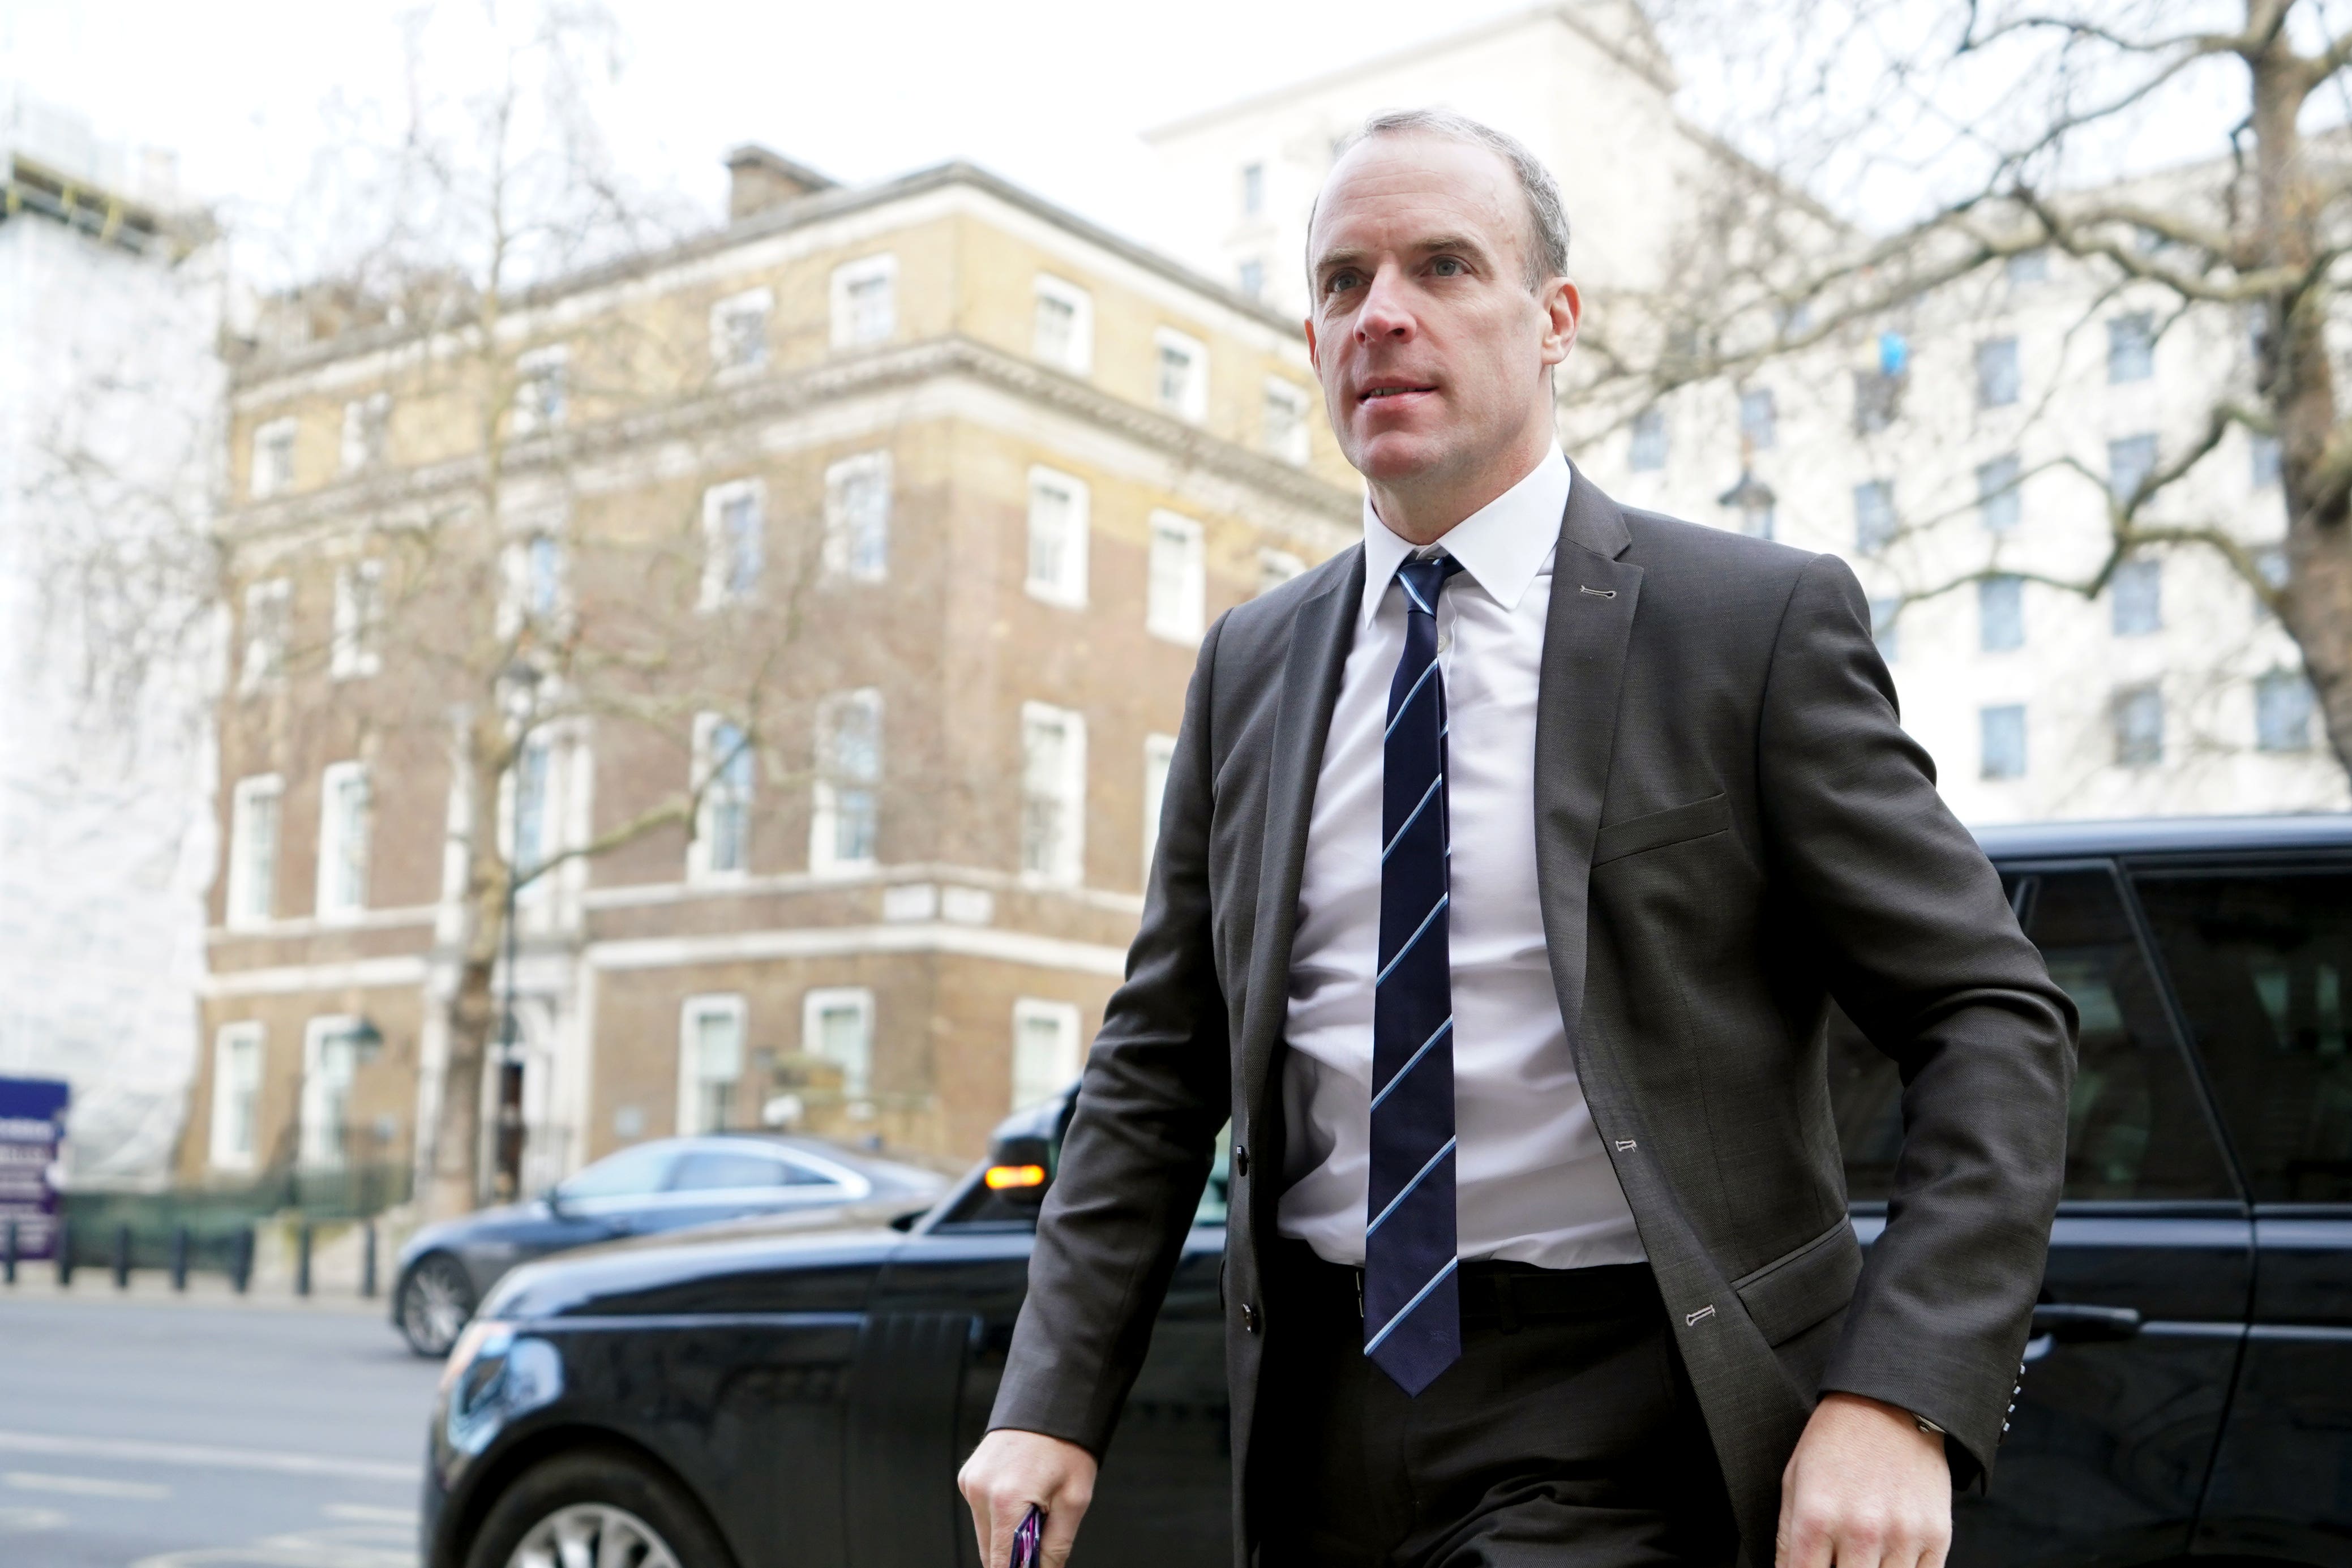 At least '24 civil servants involved in formal complaints against Dominic Raab'